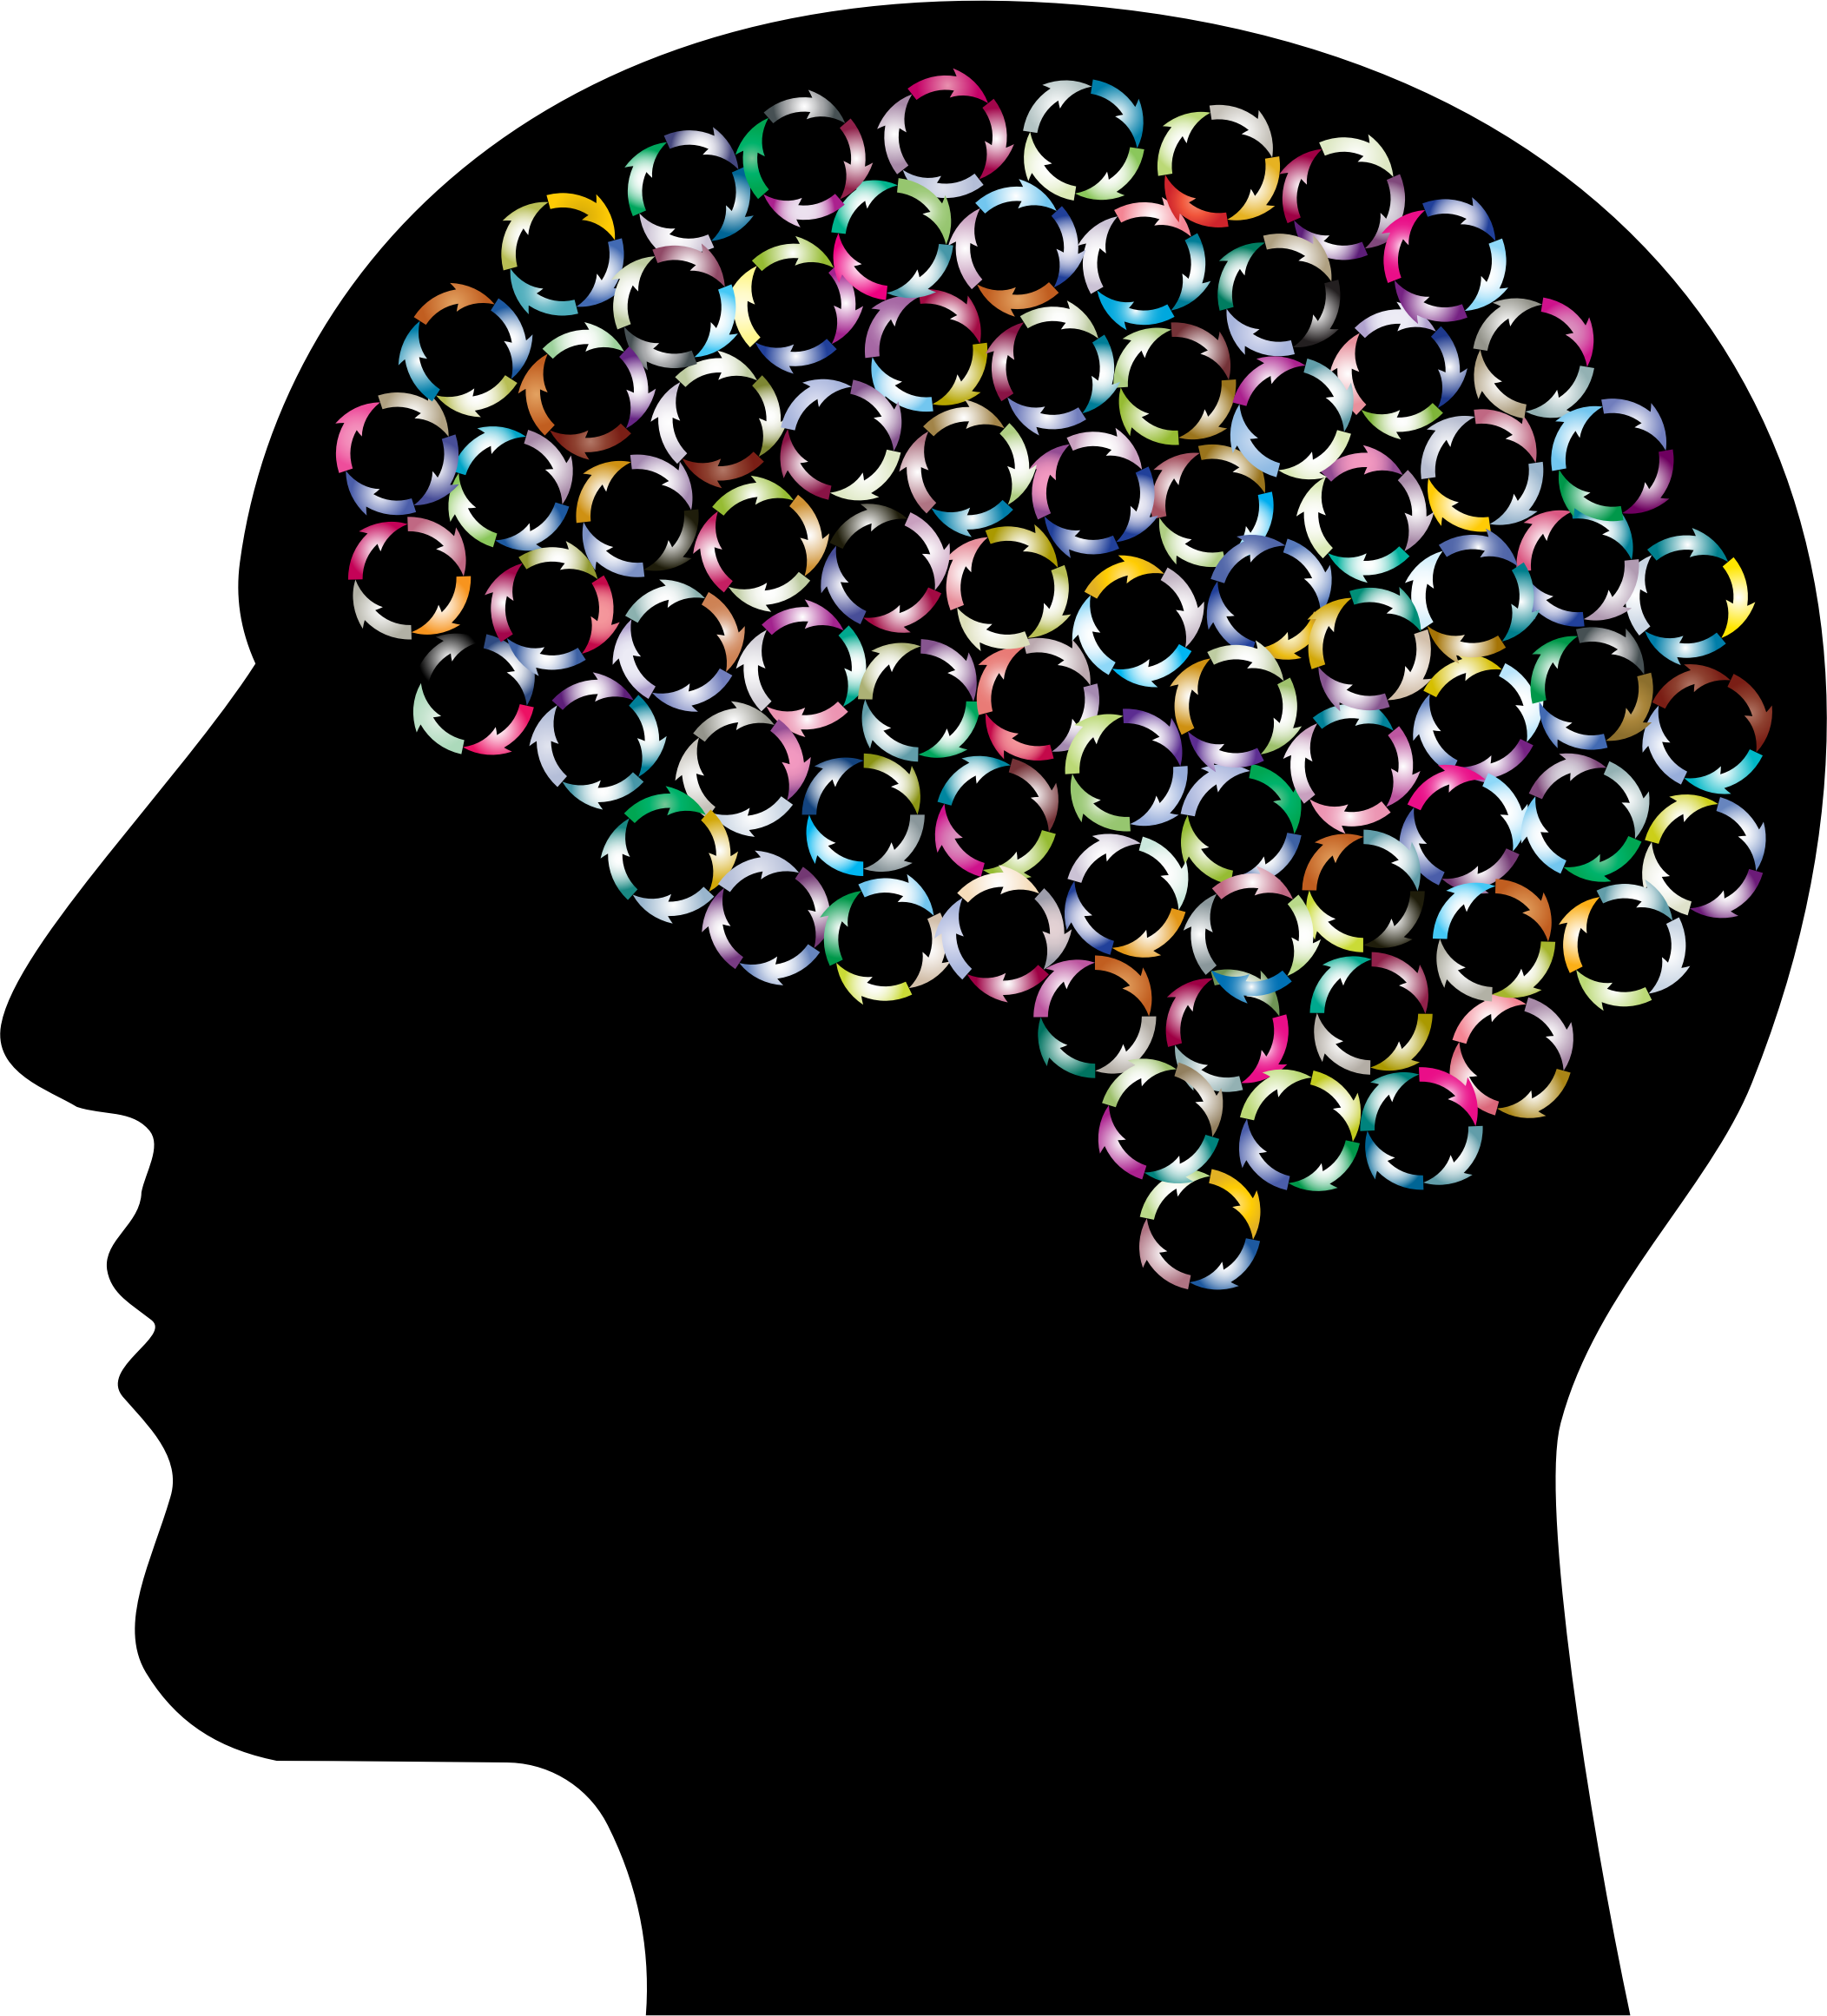 A Group Of Colorful Rings In A Shape Of A Brain